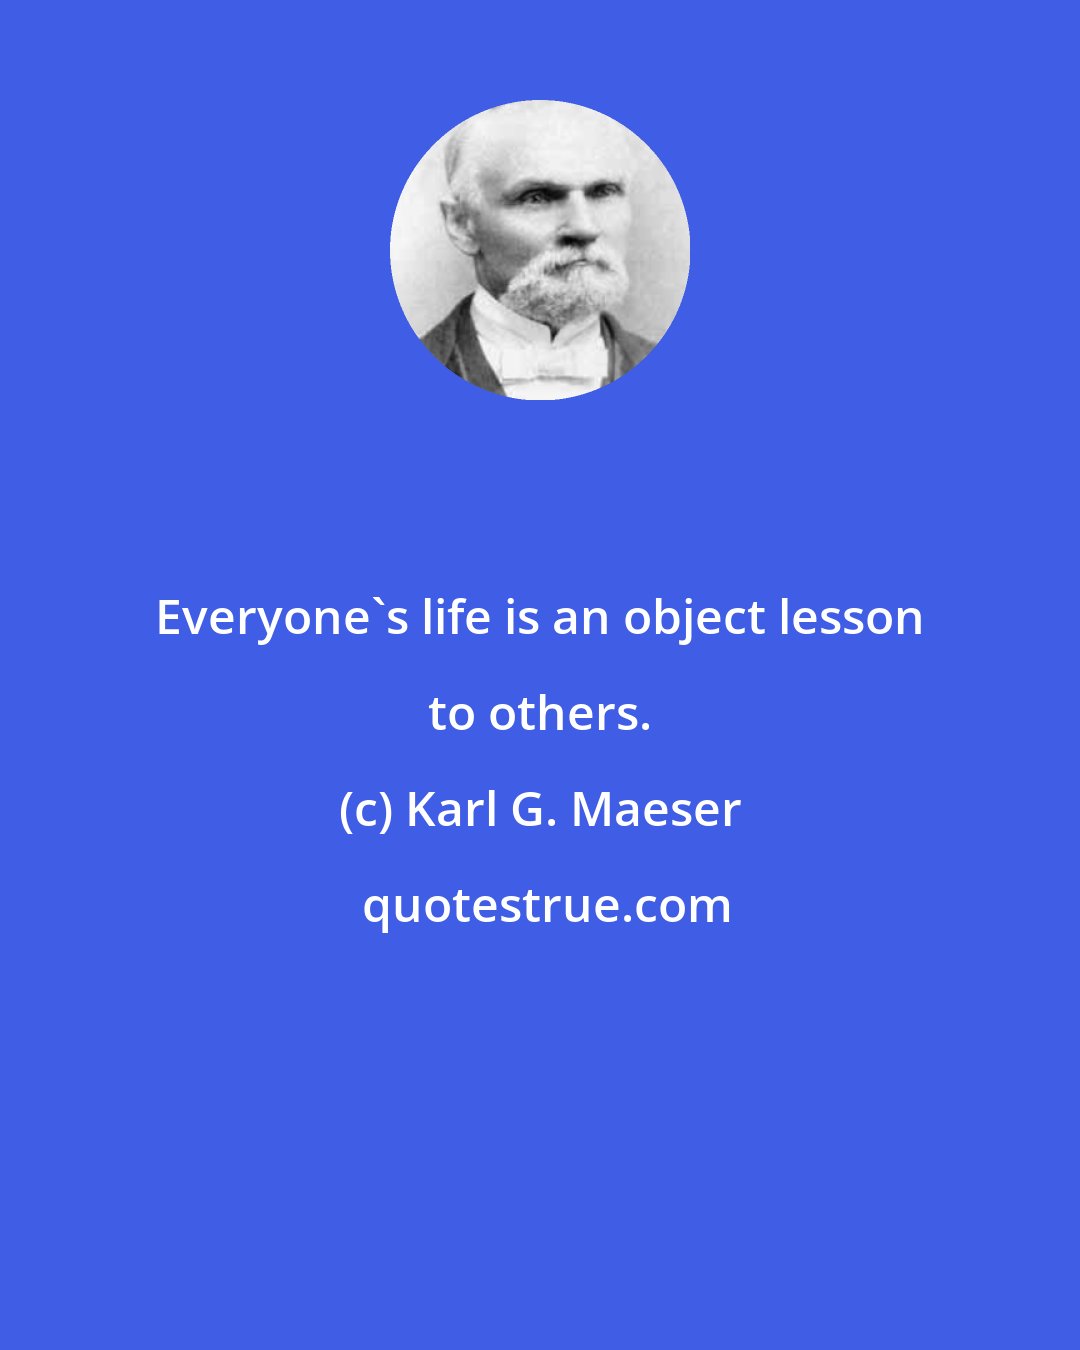 Karl G. Maeser: Everyone's life is an object lesson to others.